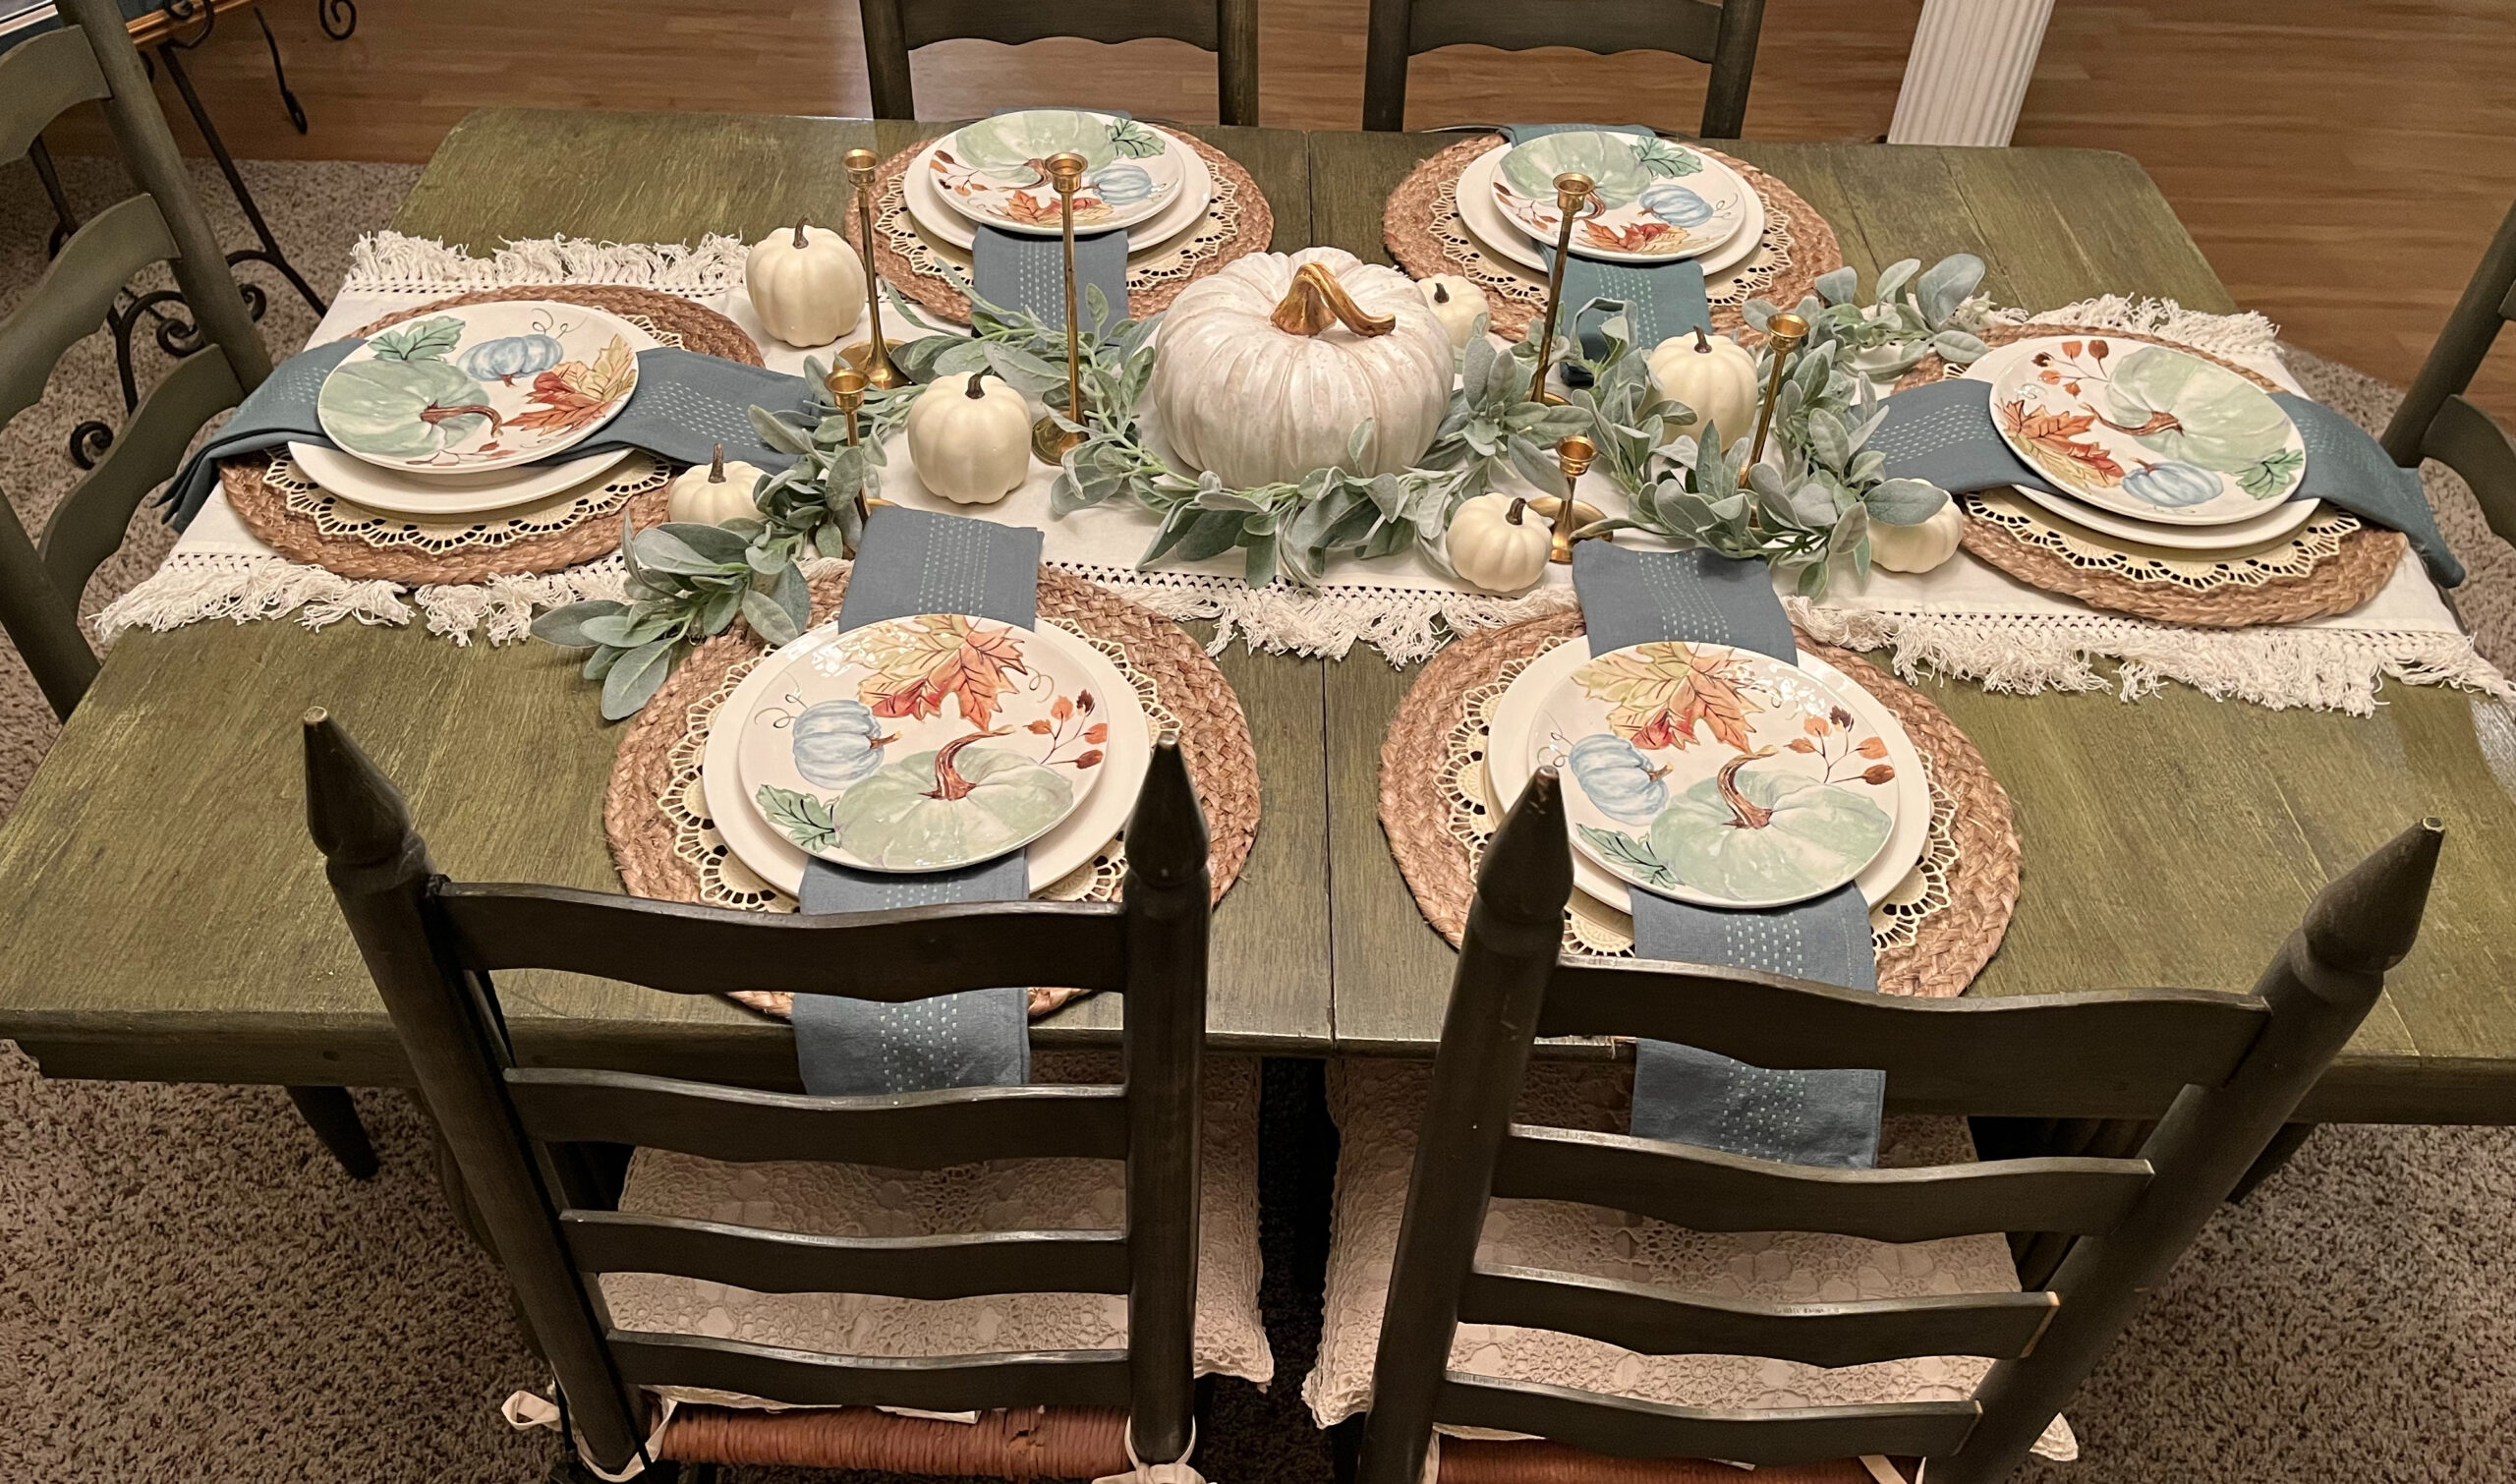 How to Decorate a Thanksgiving Table on a Budget